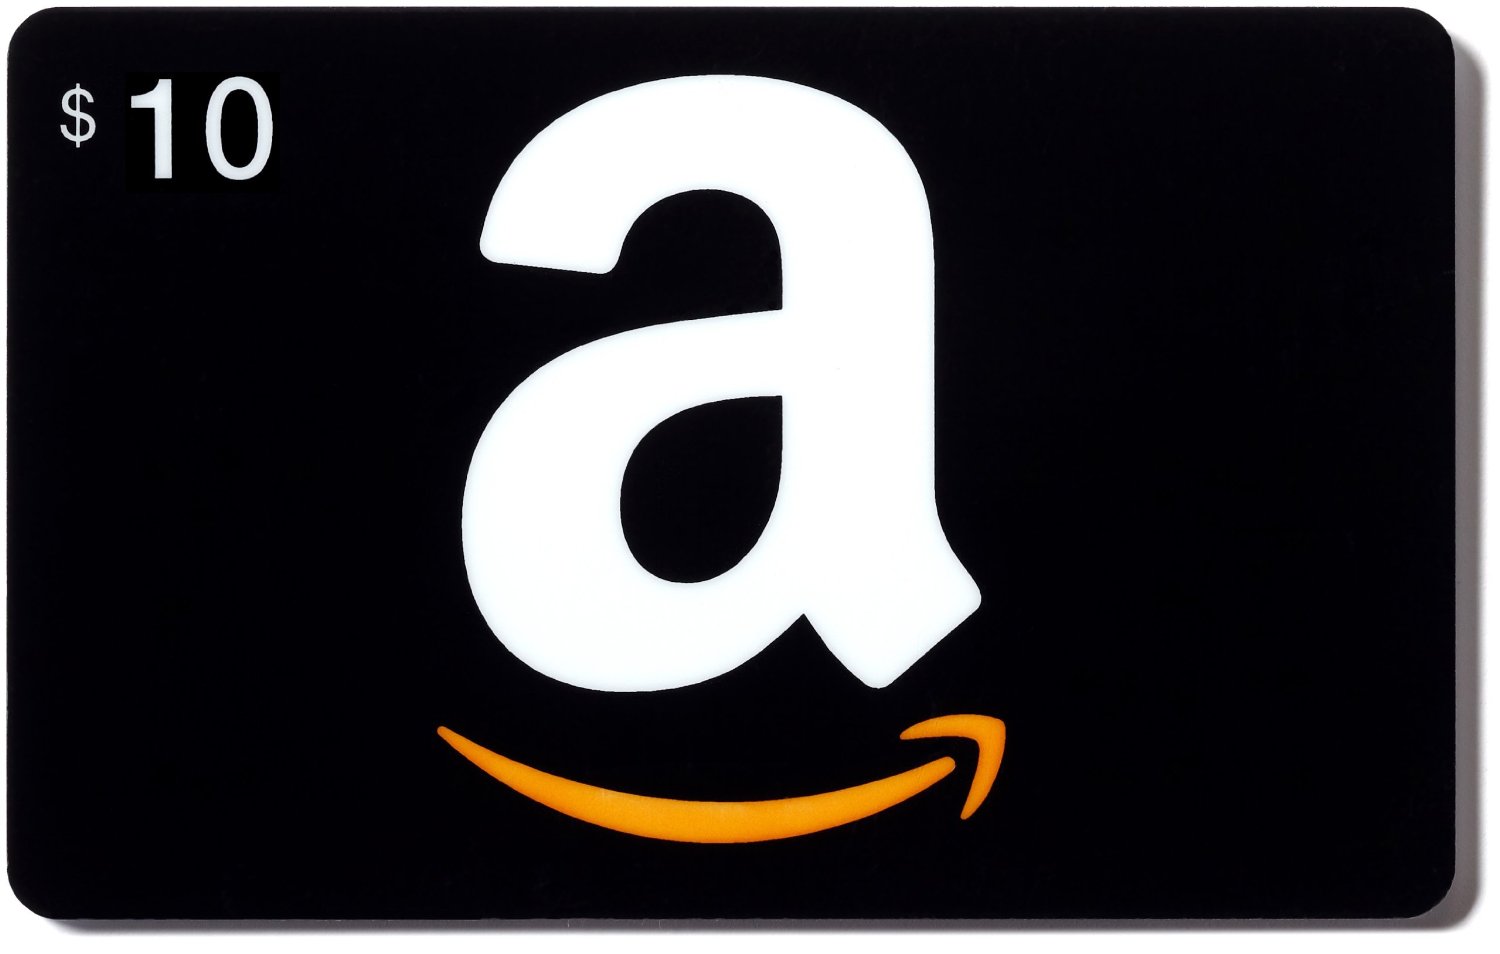 Exclusive Walmart Community Free Amazon Gift Cards for